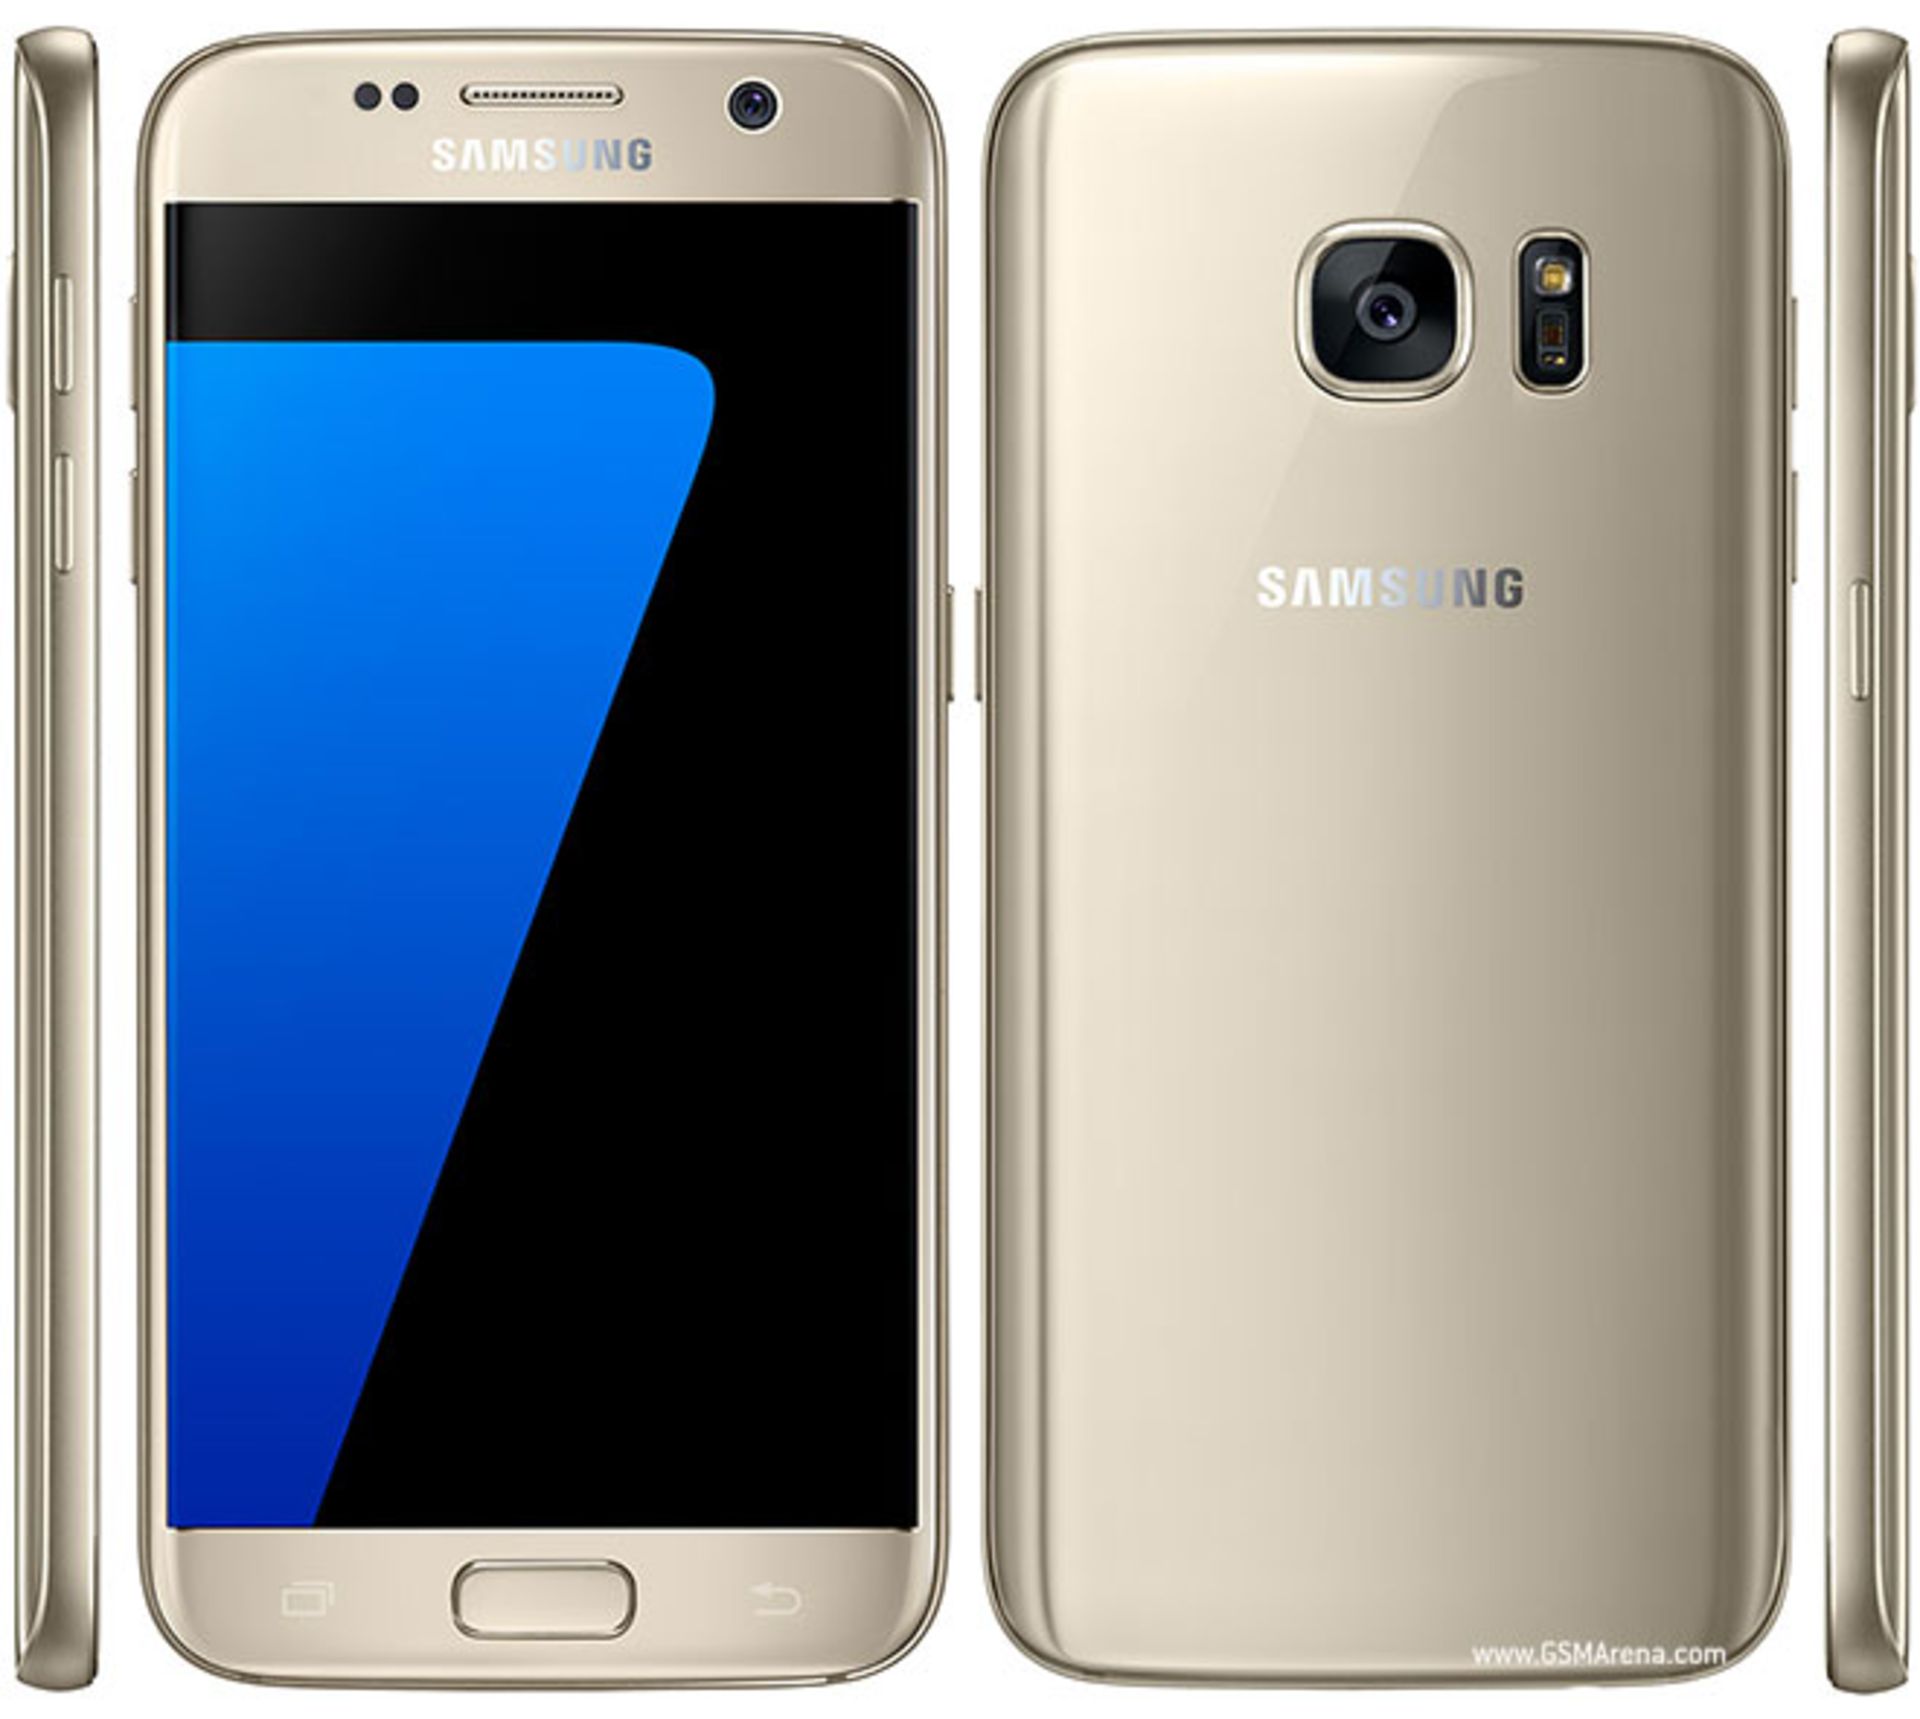 Grade A Samsung Galaxy S7 - 5.1" Screen - Samsung Box With Some Accessories - Colours May Vary -